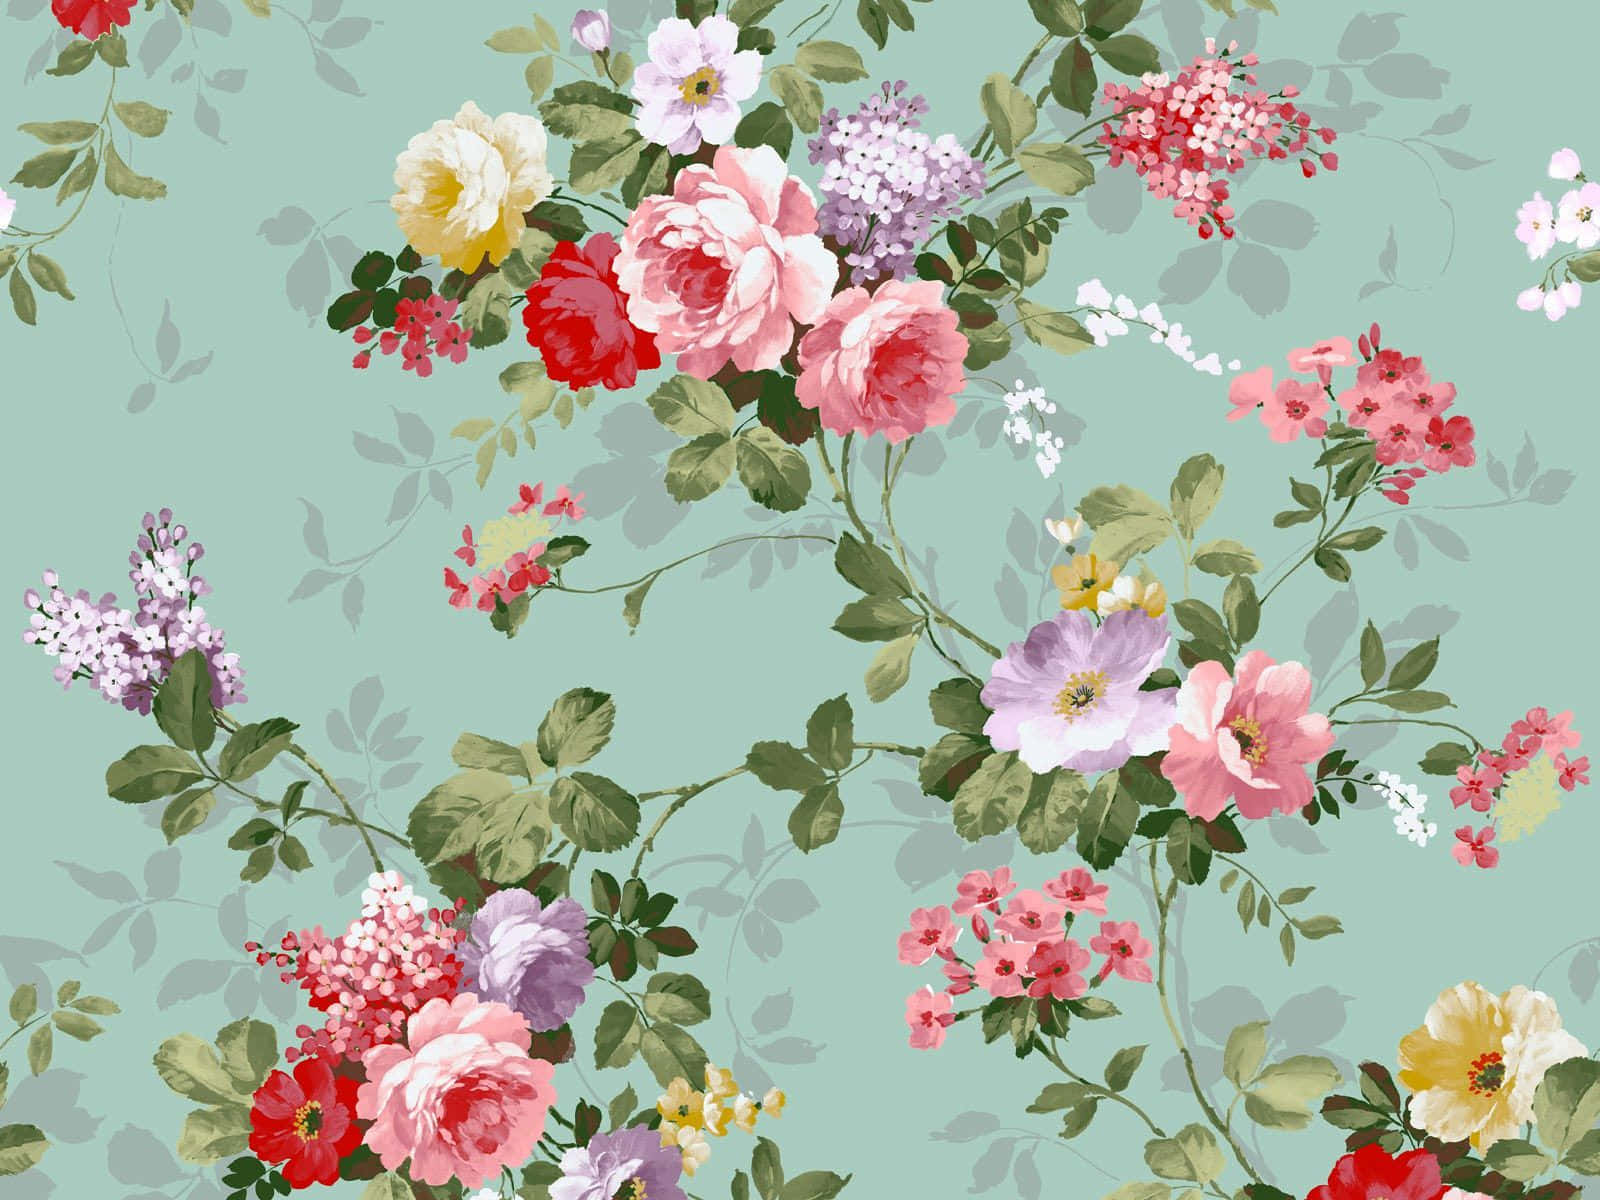 Live Life In Full Blossom With This Beautiful Flower Laptop Background!